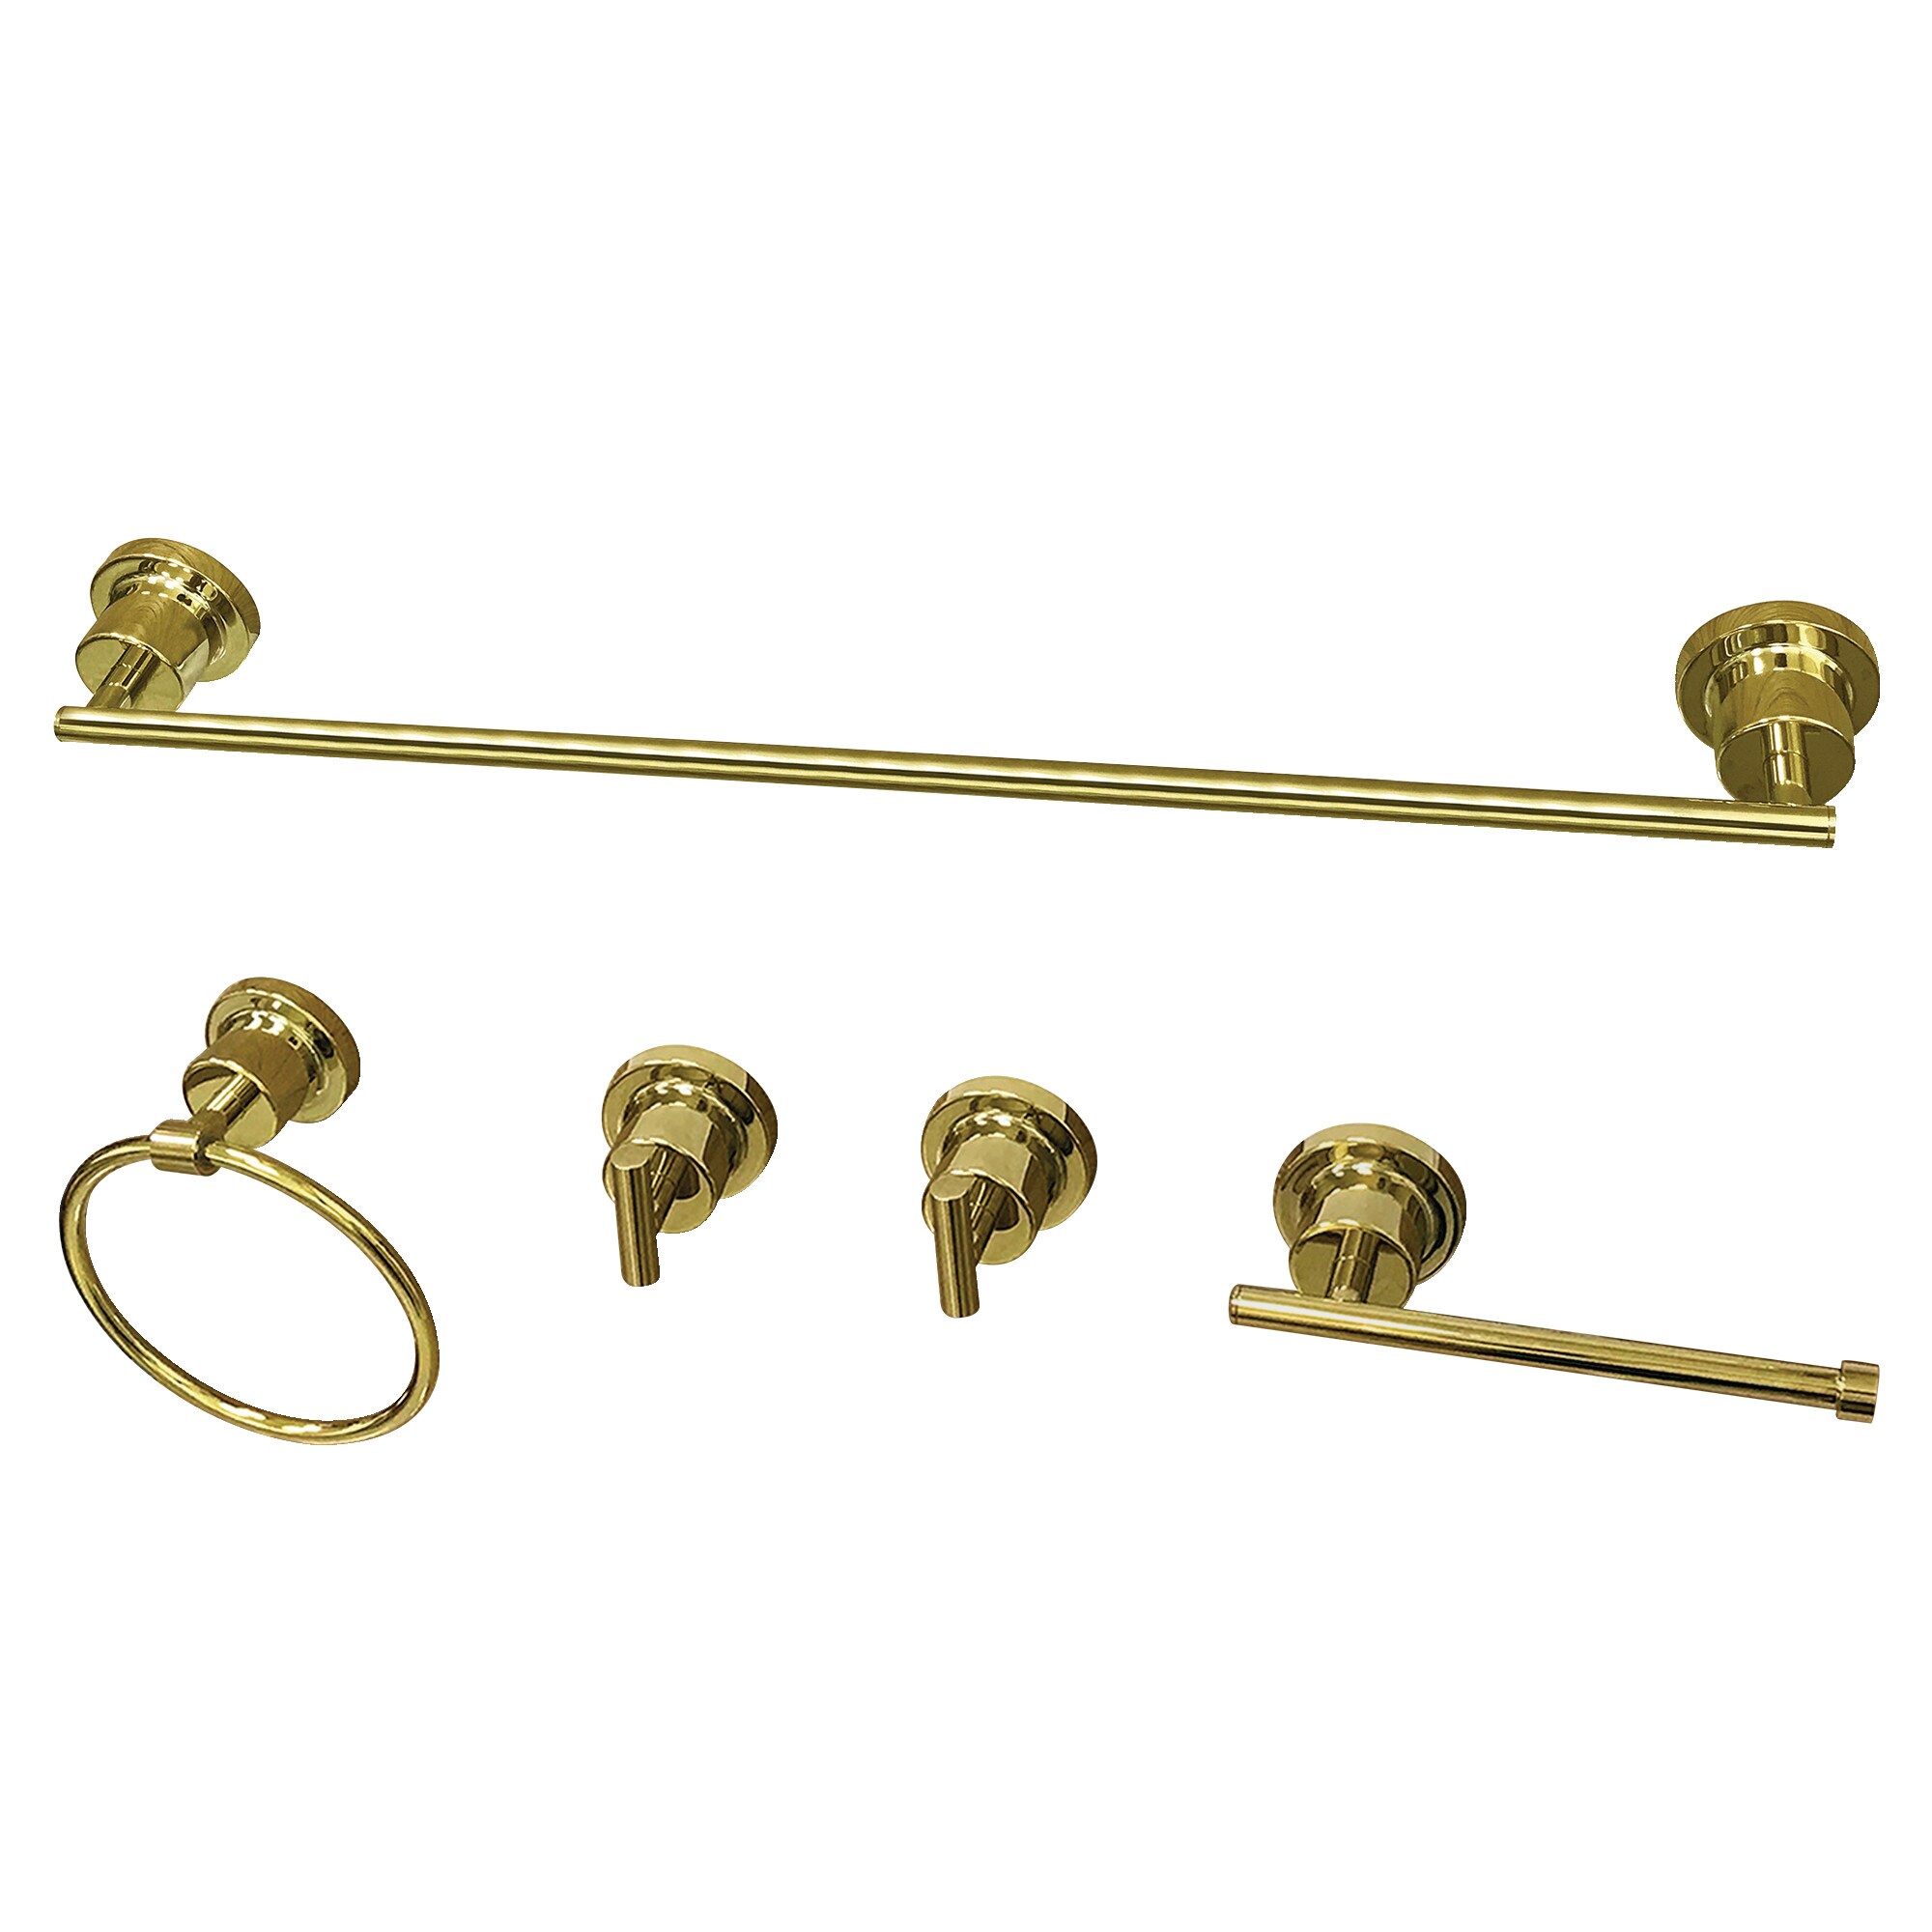 Kingston Brass 5-Piece Concord Polished Brass Decorative Bathroom Hardware Set with Towel Bar, Toilet Paper Holder, Towel Ring and Robe Hook